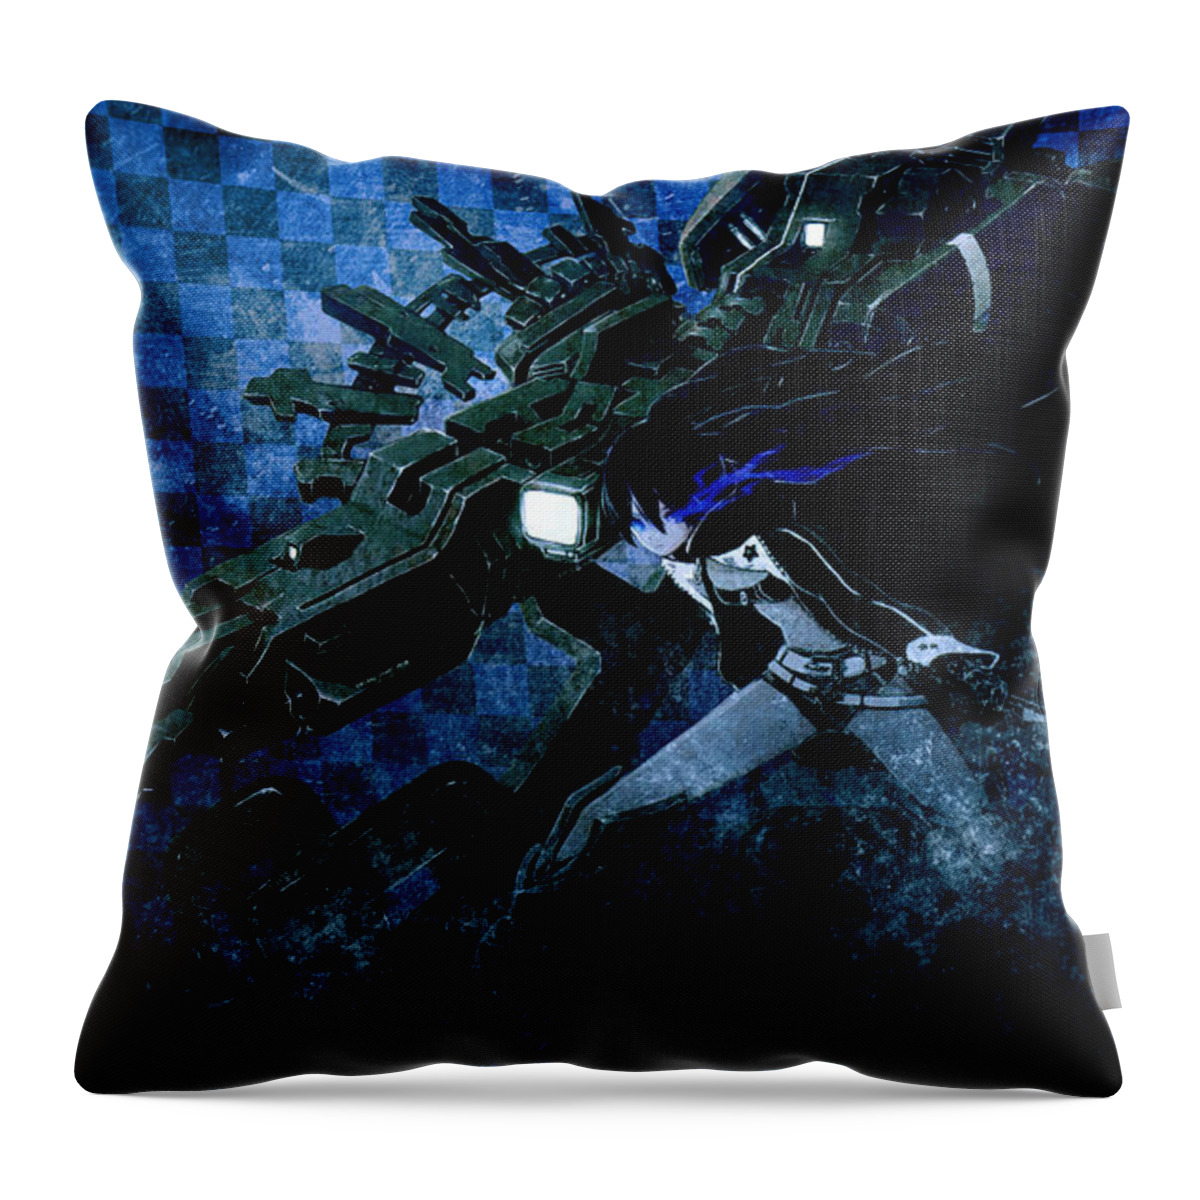 Black Rock Shooter Throw Pillow featuring the digital art Black Rock Shooter #23 by Super Lovely